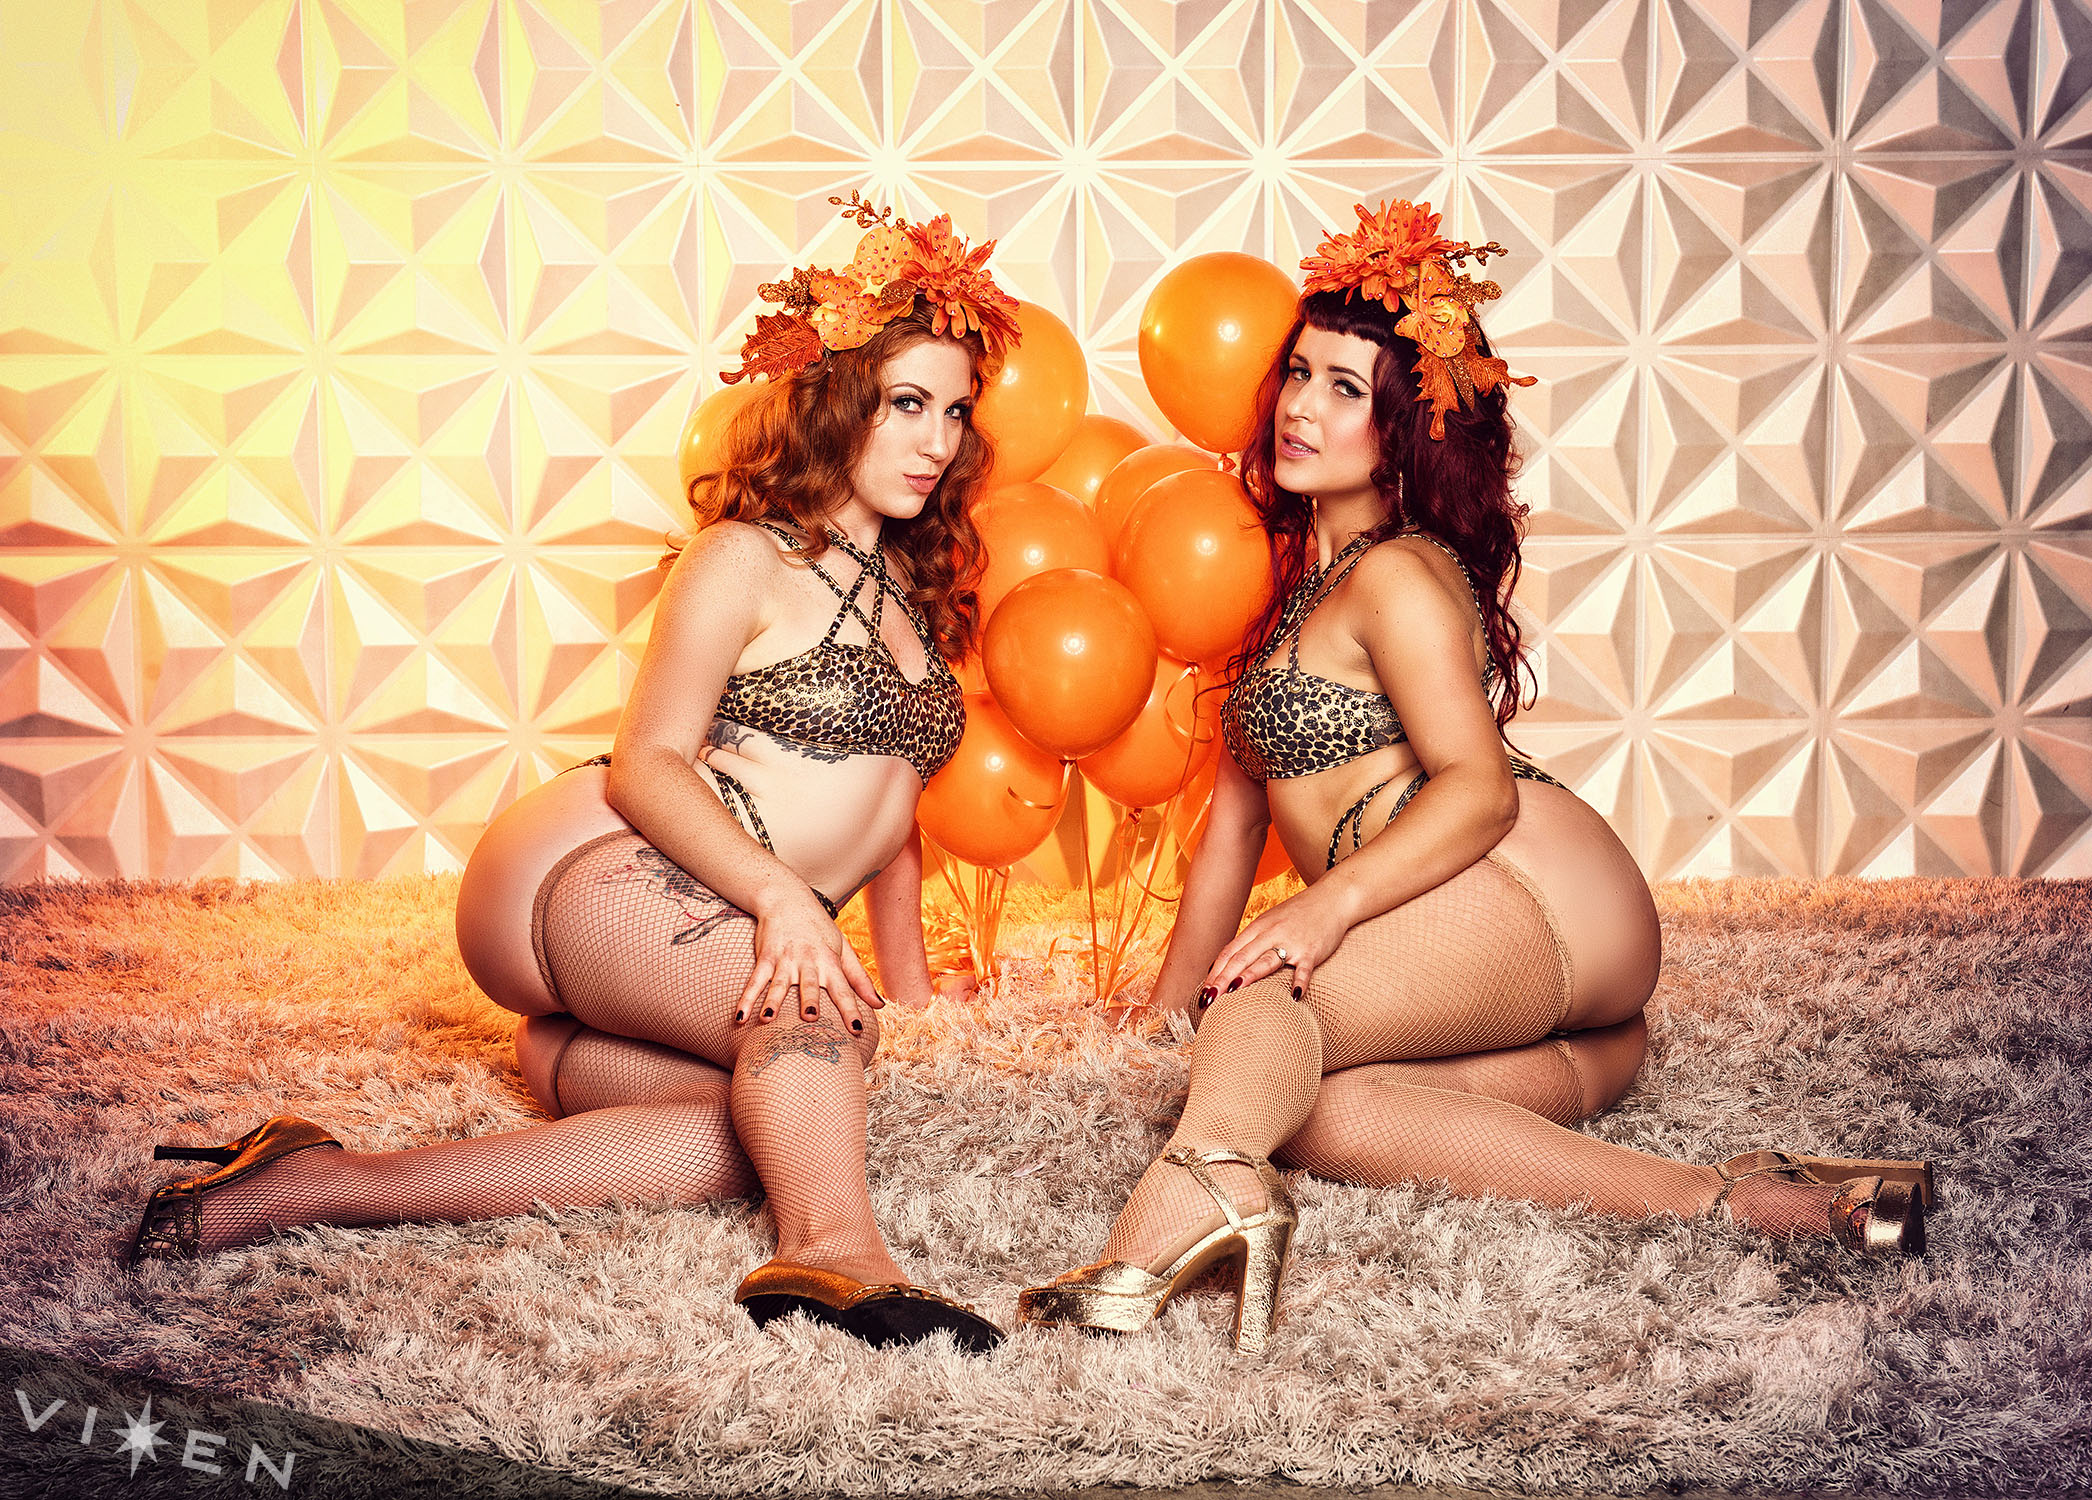 Eva Mae Garnet and Ginger N. Whiskey of Whiskey & Fuego Burlesque in San Diego